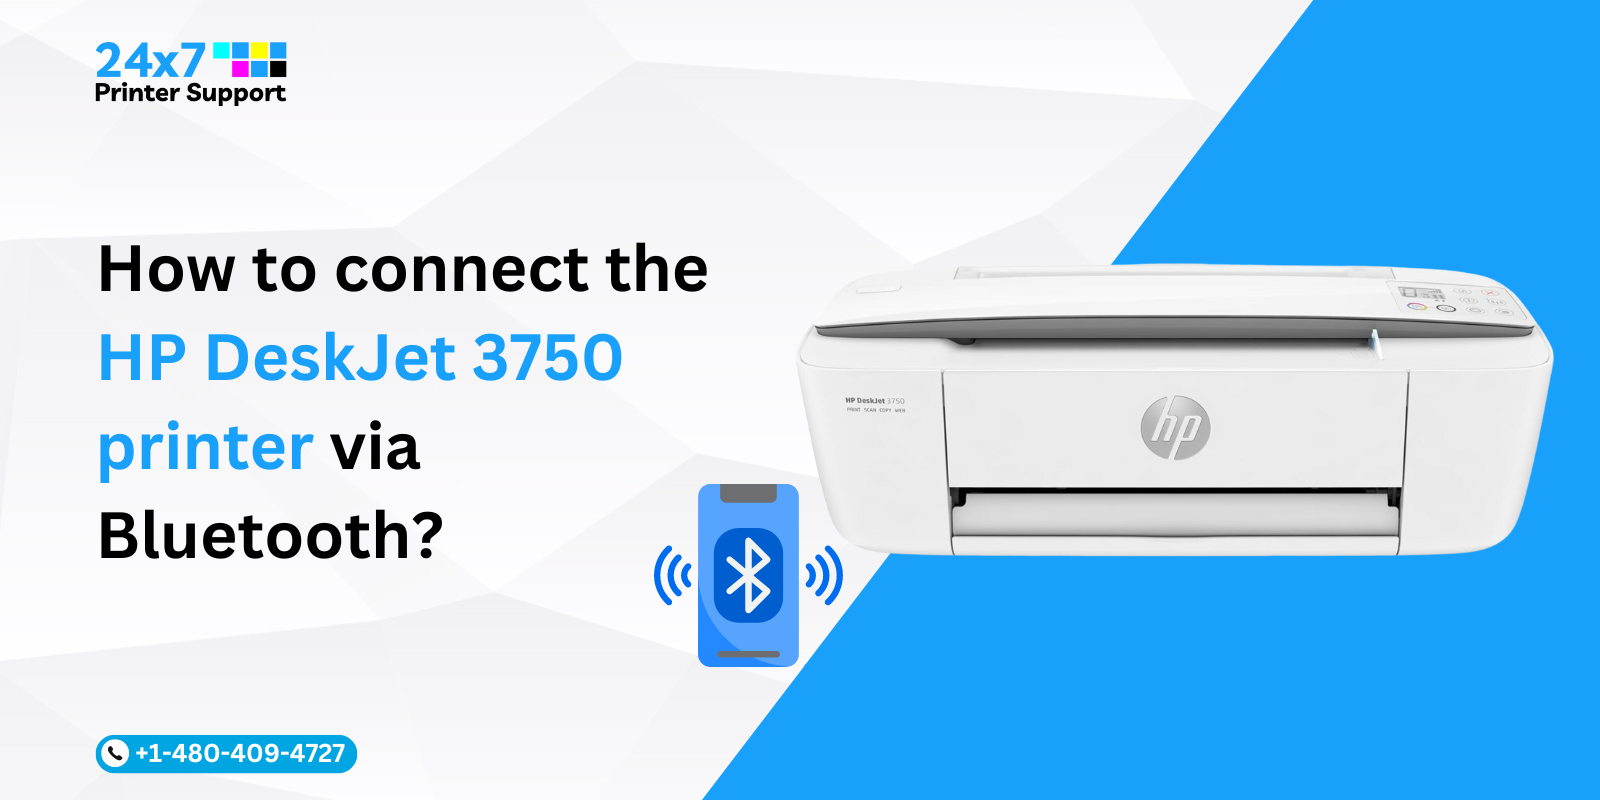 How to connect the HP DeskJet 3750 printer via Bluetooth?